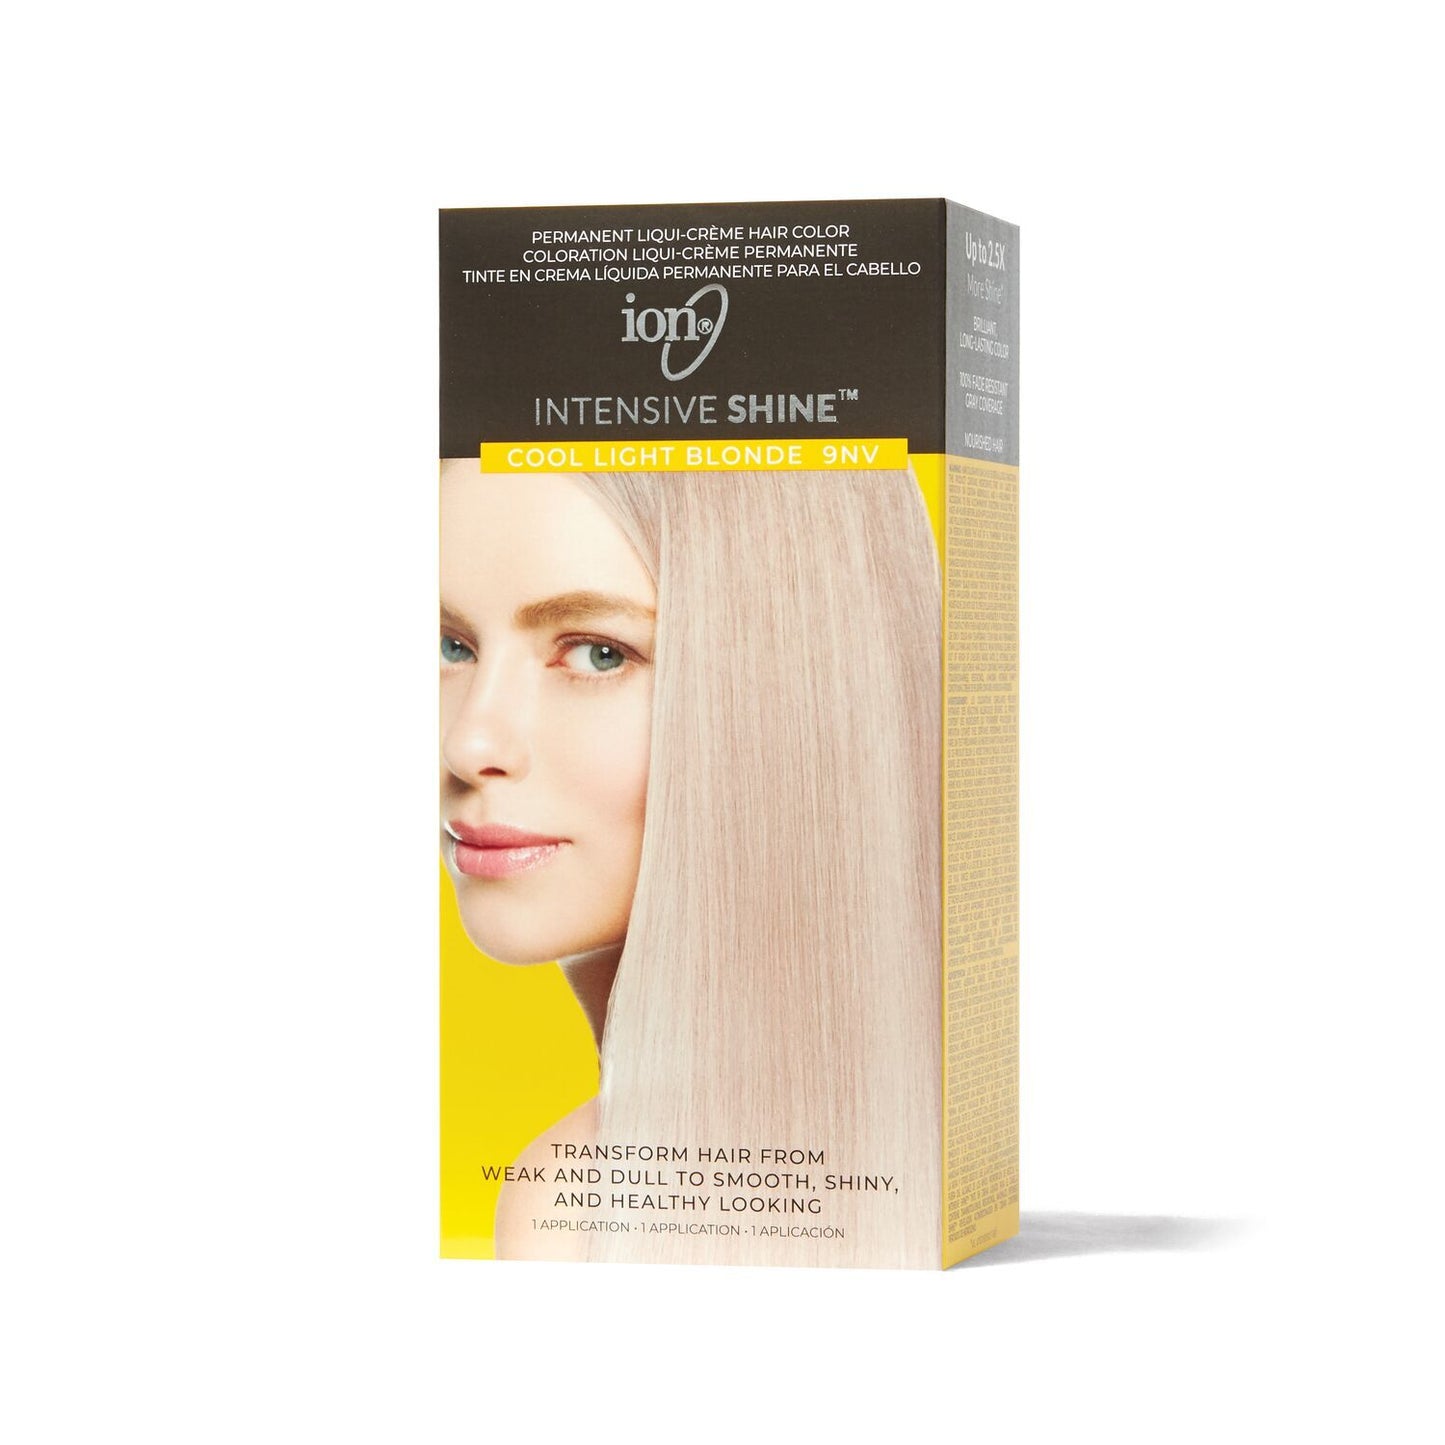 Intensive Shine  by   ion Intensive Shine Hair Color Kit Cool Light Blonde 9NV